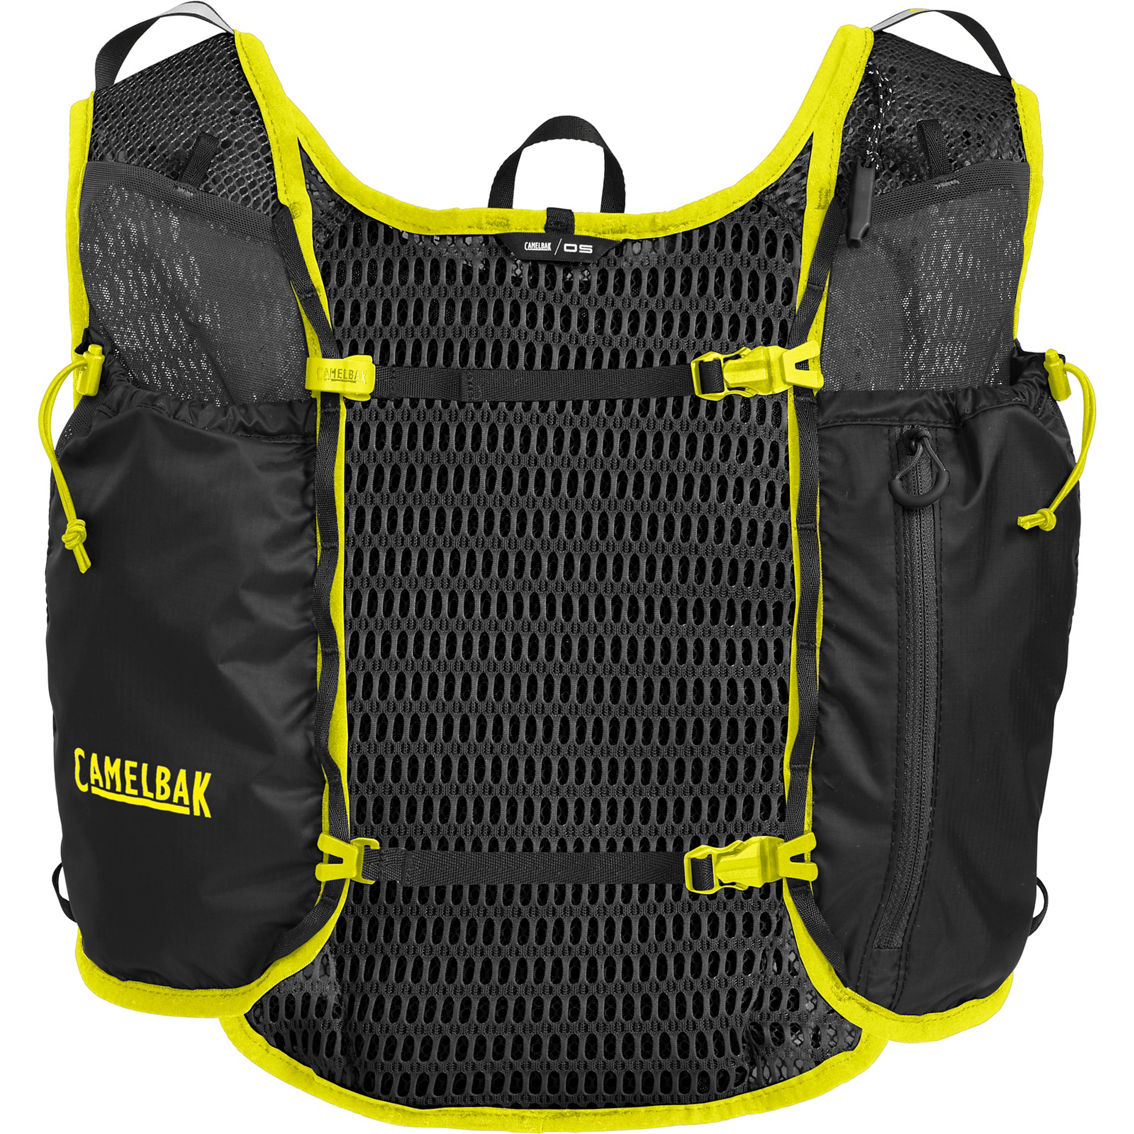 Camelbak Trail Run Vest with Two 17 oz. Quick Stow Flasks - Image 8 of 8